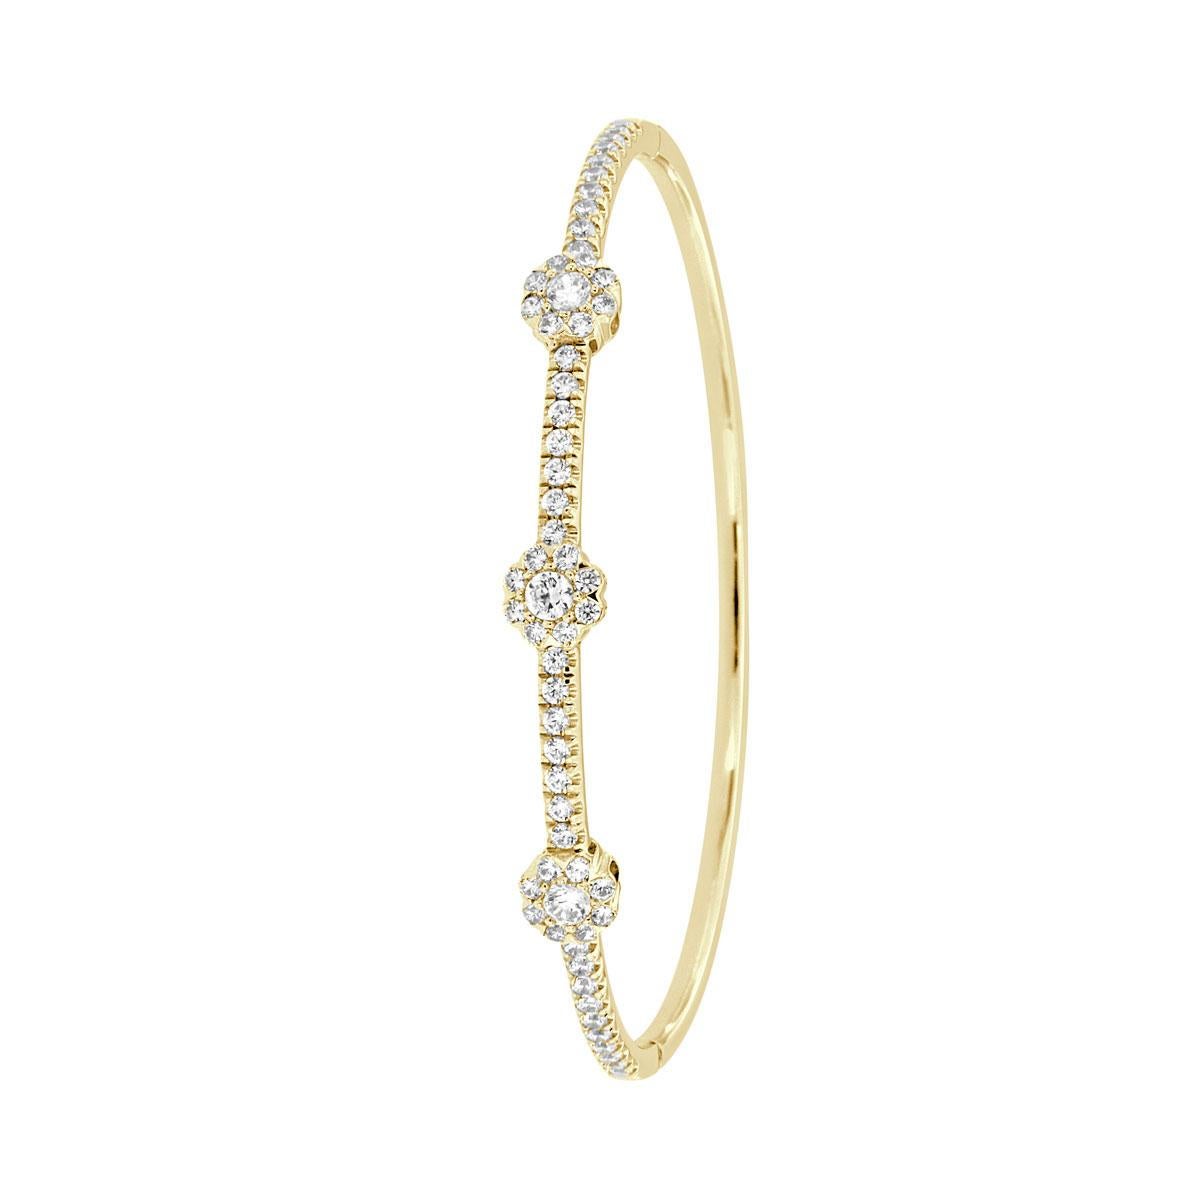 This stunning bangle features round brilliant diamonds micro-prong-set to maximize its brilliance. Experience the difference!

Product details: 

Center Gemstone Type: NATURAL DIAMOND
Center Gemstone Color: WHITE
Center Gemstone Shape: ROUND
Center